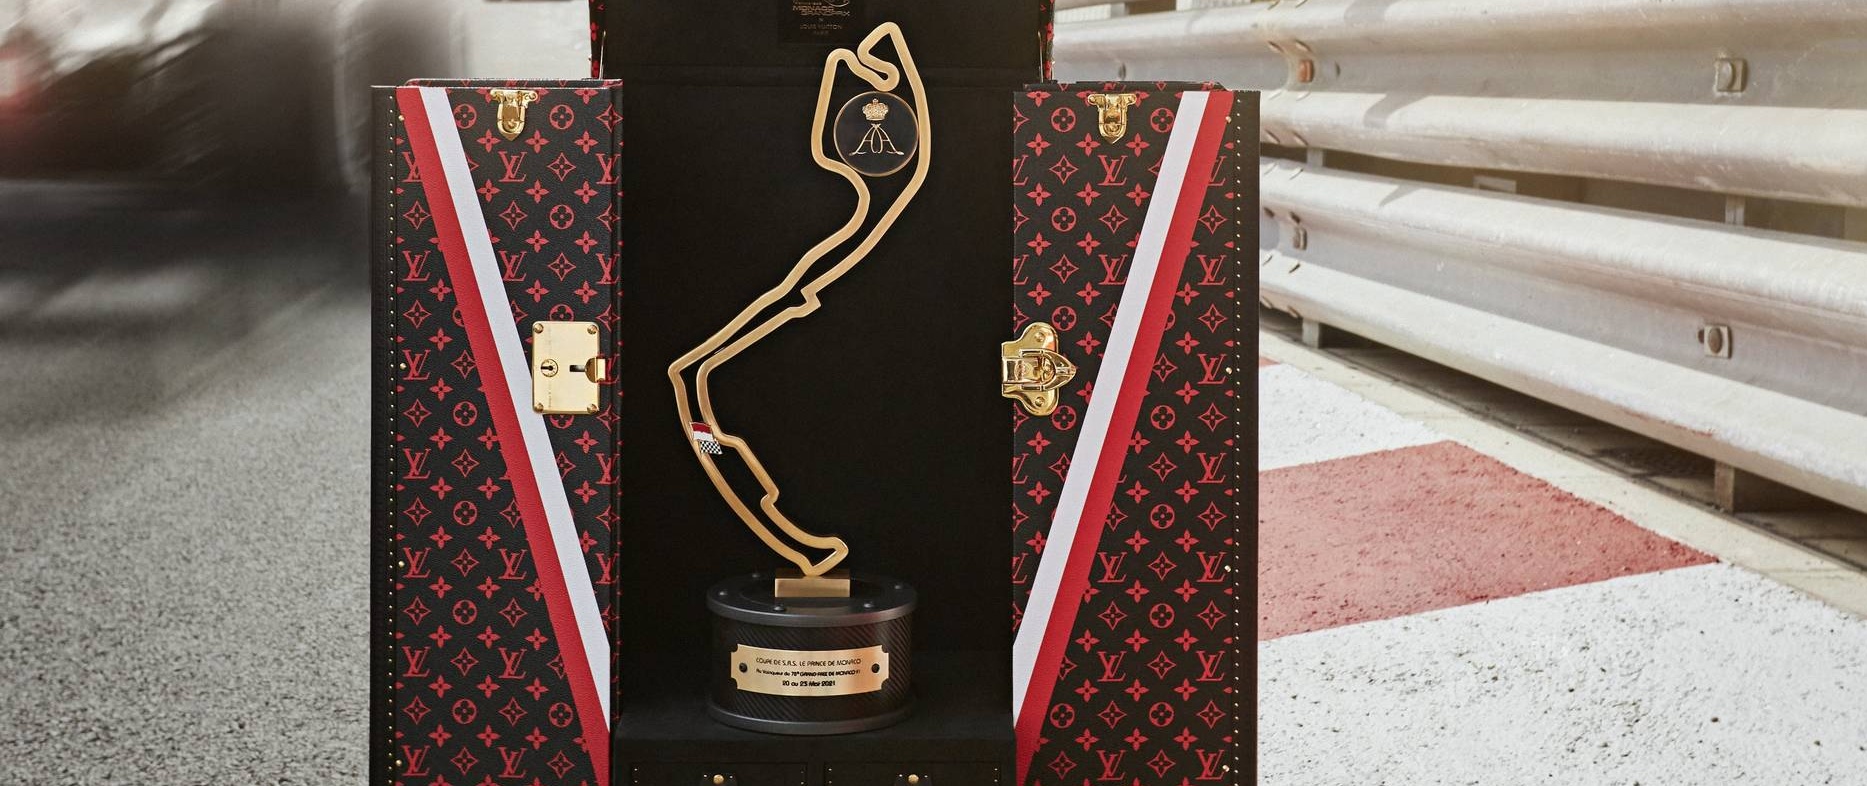 Louis Vuitton Presents The Trophy Trunk Case For The 80th F1 Grand